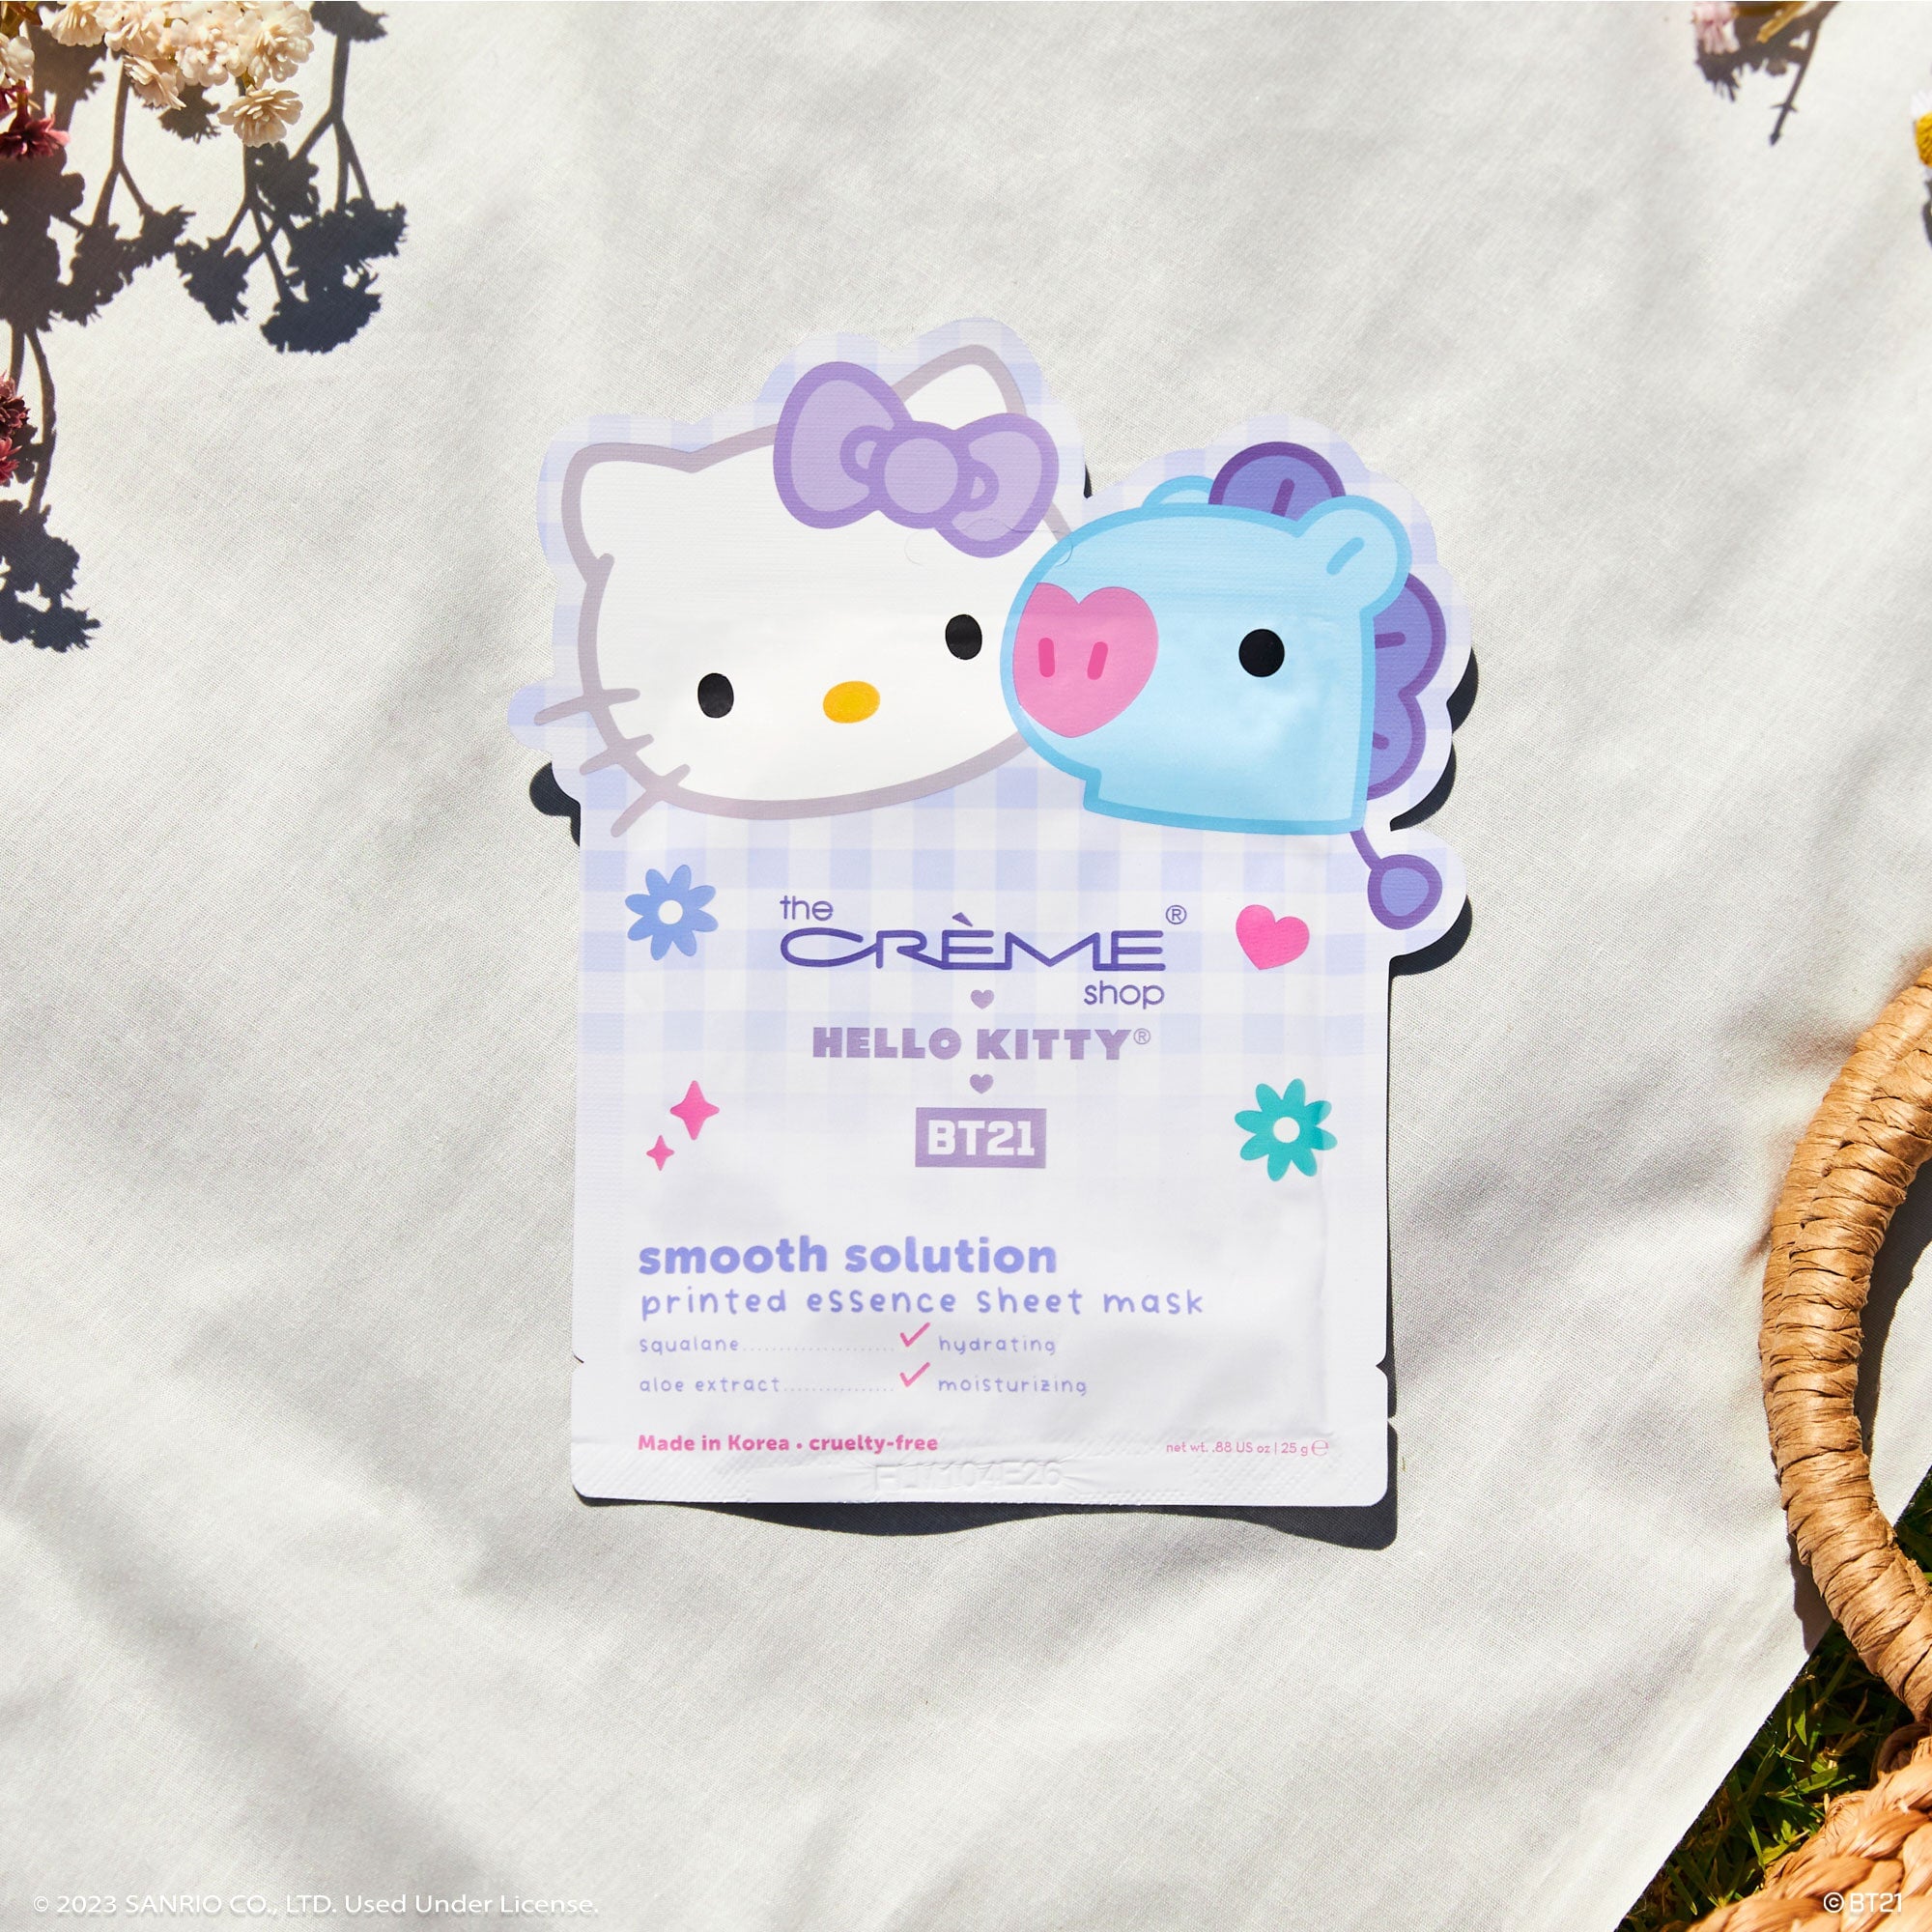 Hello Kitty & BT21 Smooth Solution Printed Essence Sheet Mask with Squalane and Aloe Extract, $4 